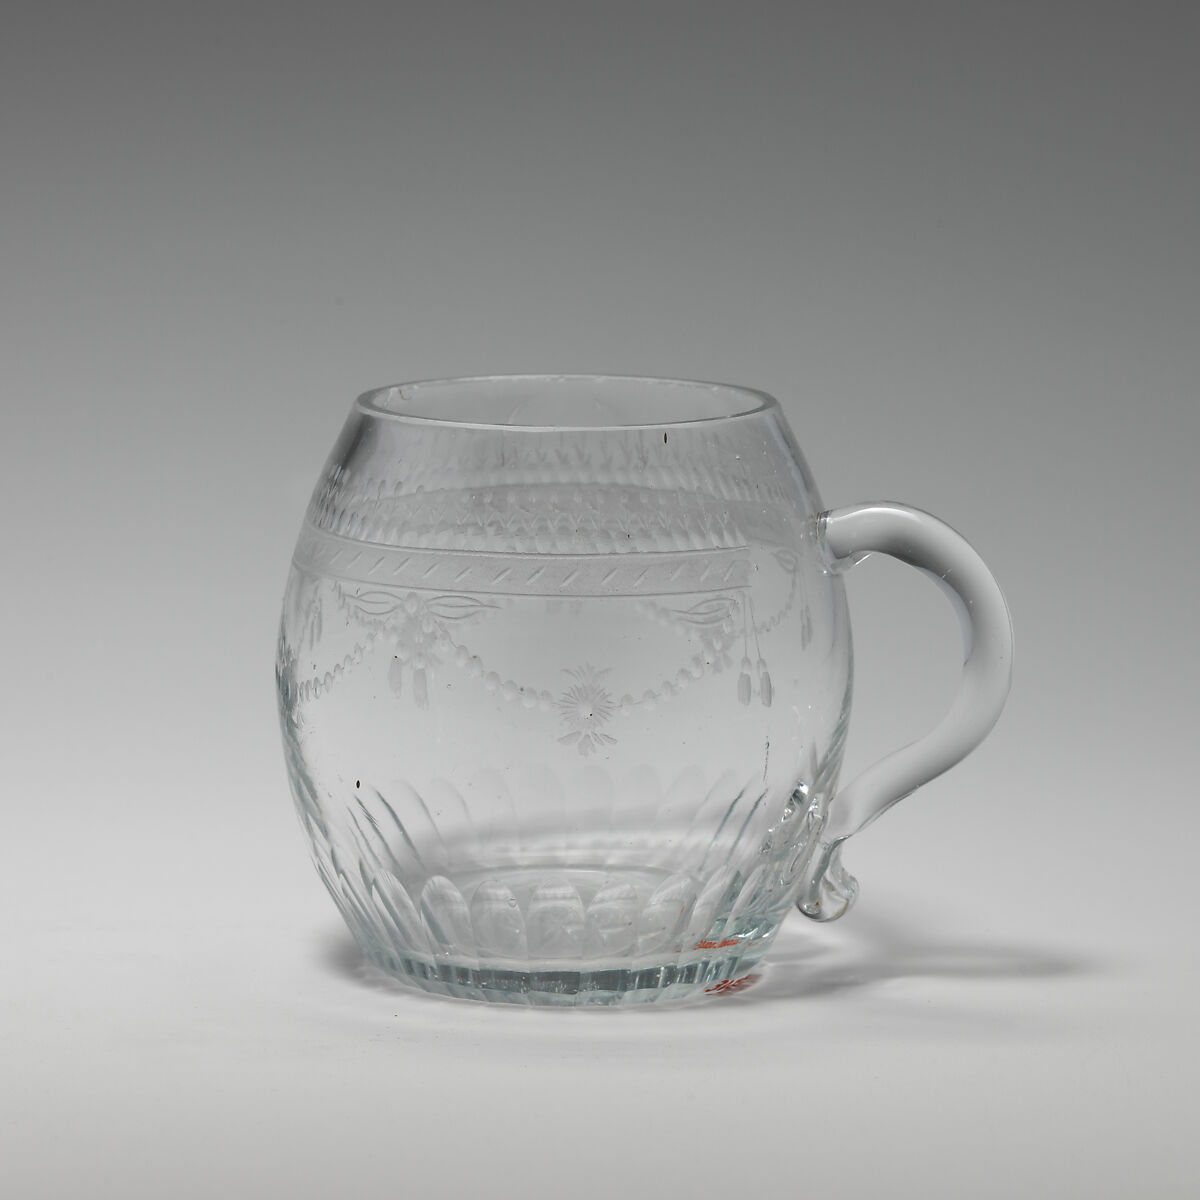 Punch cup (one of two), Glass, probably Irish 